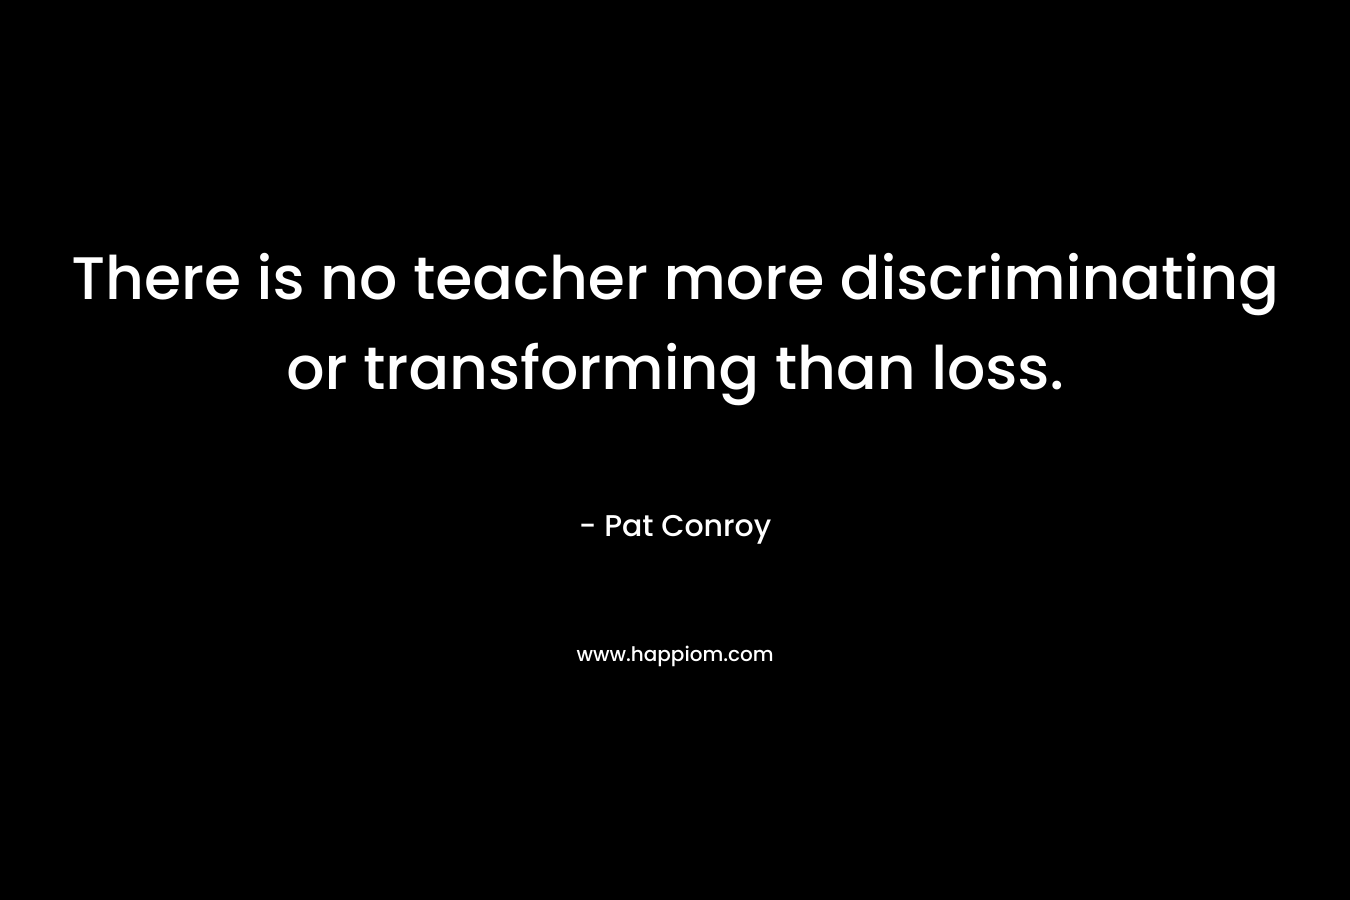 There is no teacher more discriminating or transforming than loss. – Pat Conroy